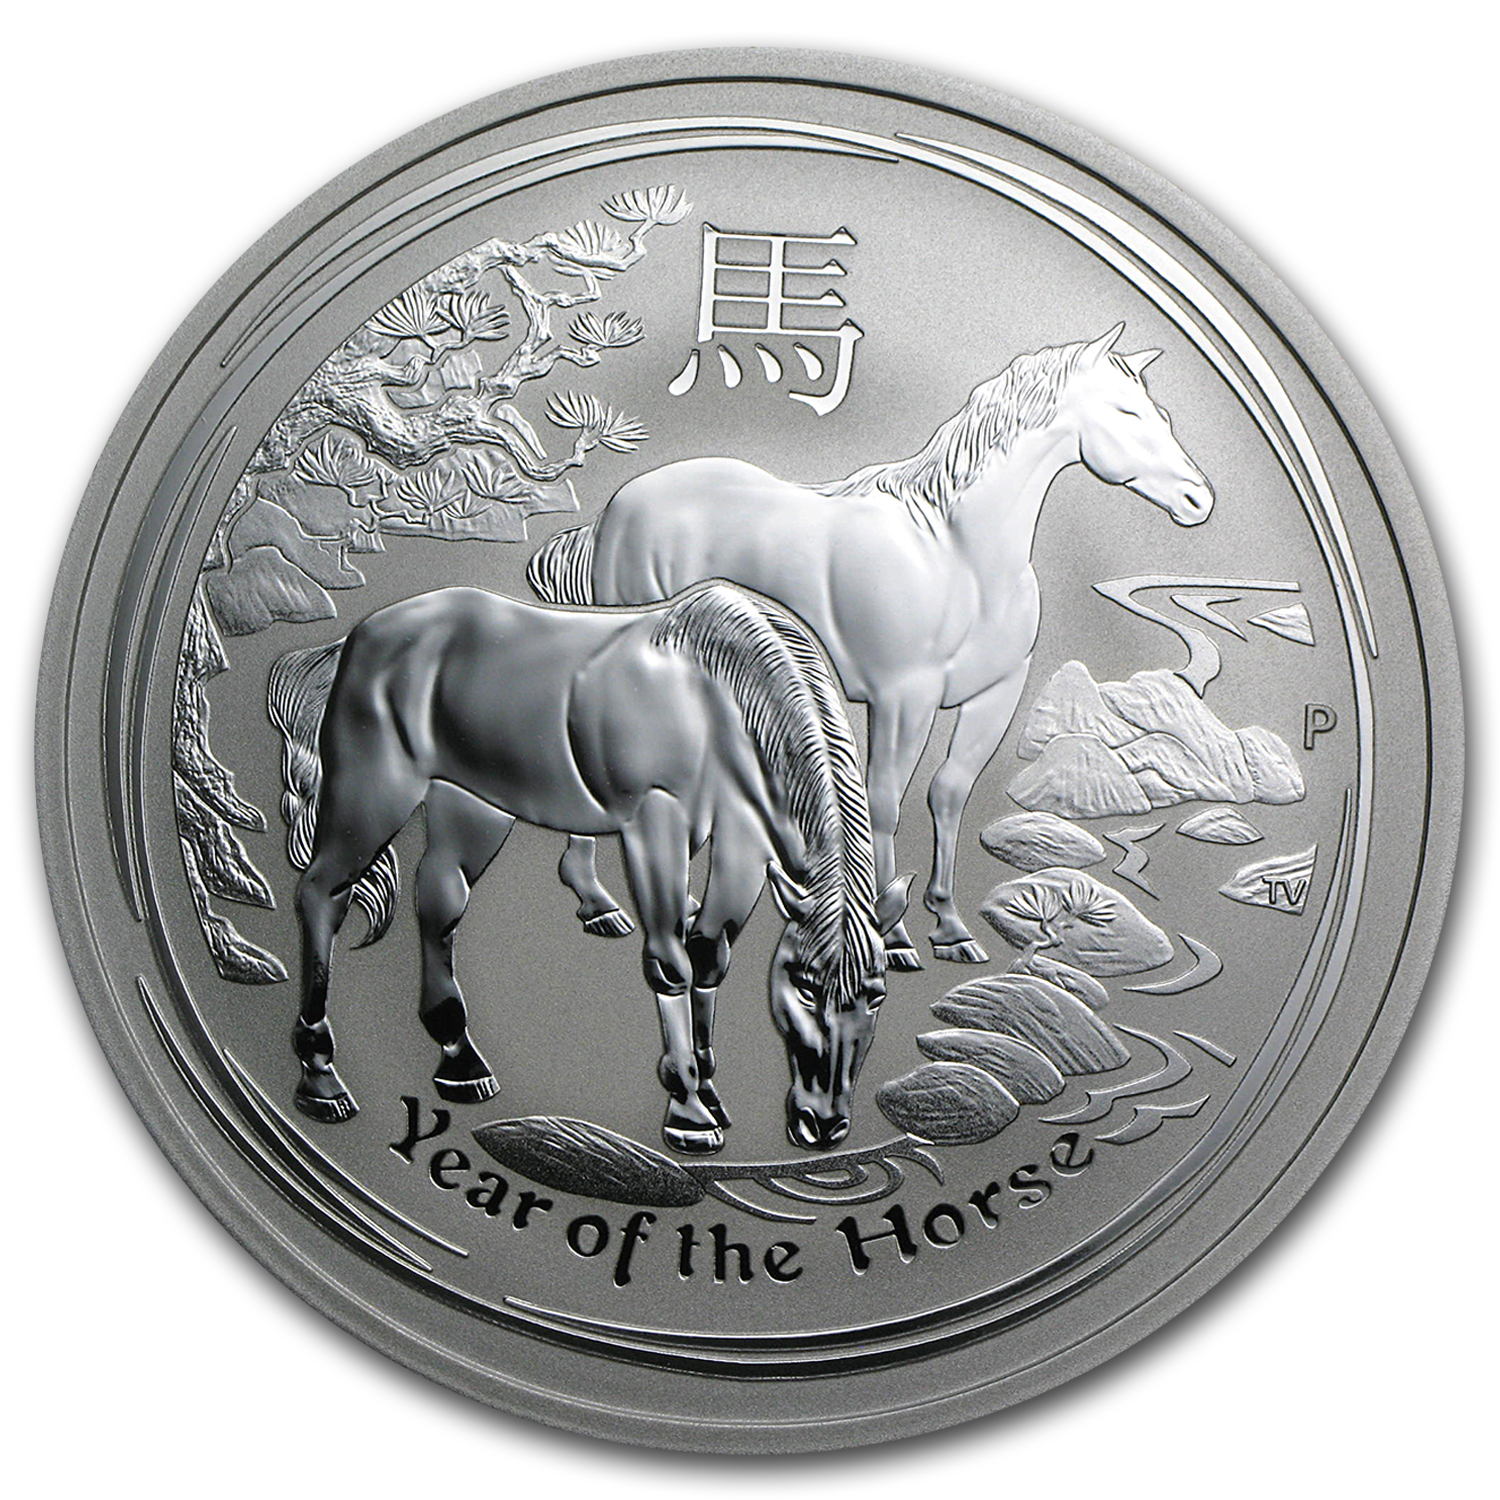 Lot of 2 1oz & 2 oz 2014 P Lunar Year Of The Horse Coloured .999 Silver Coins 